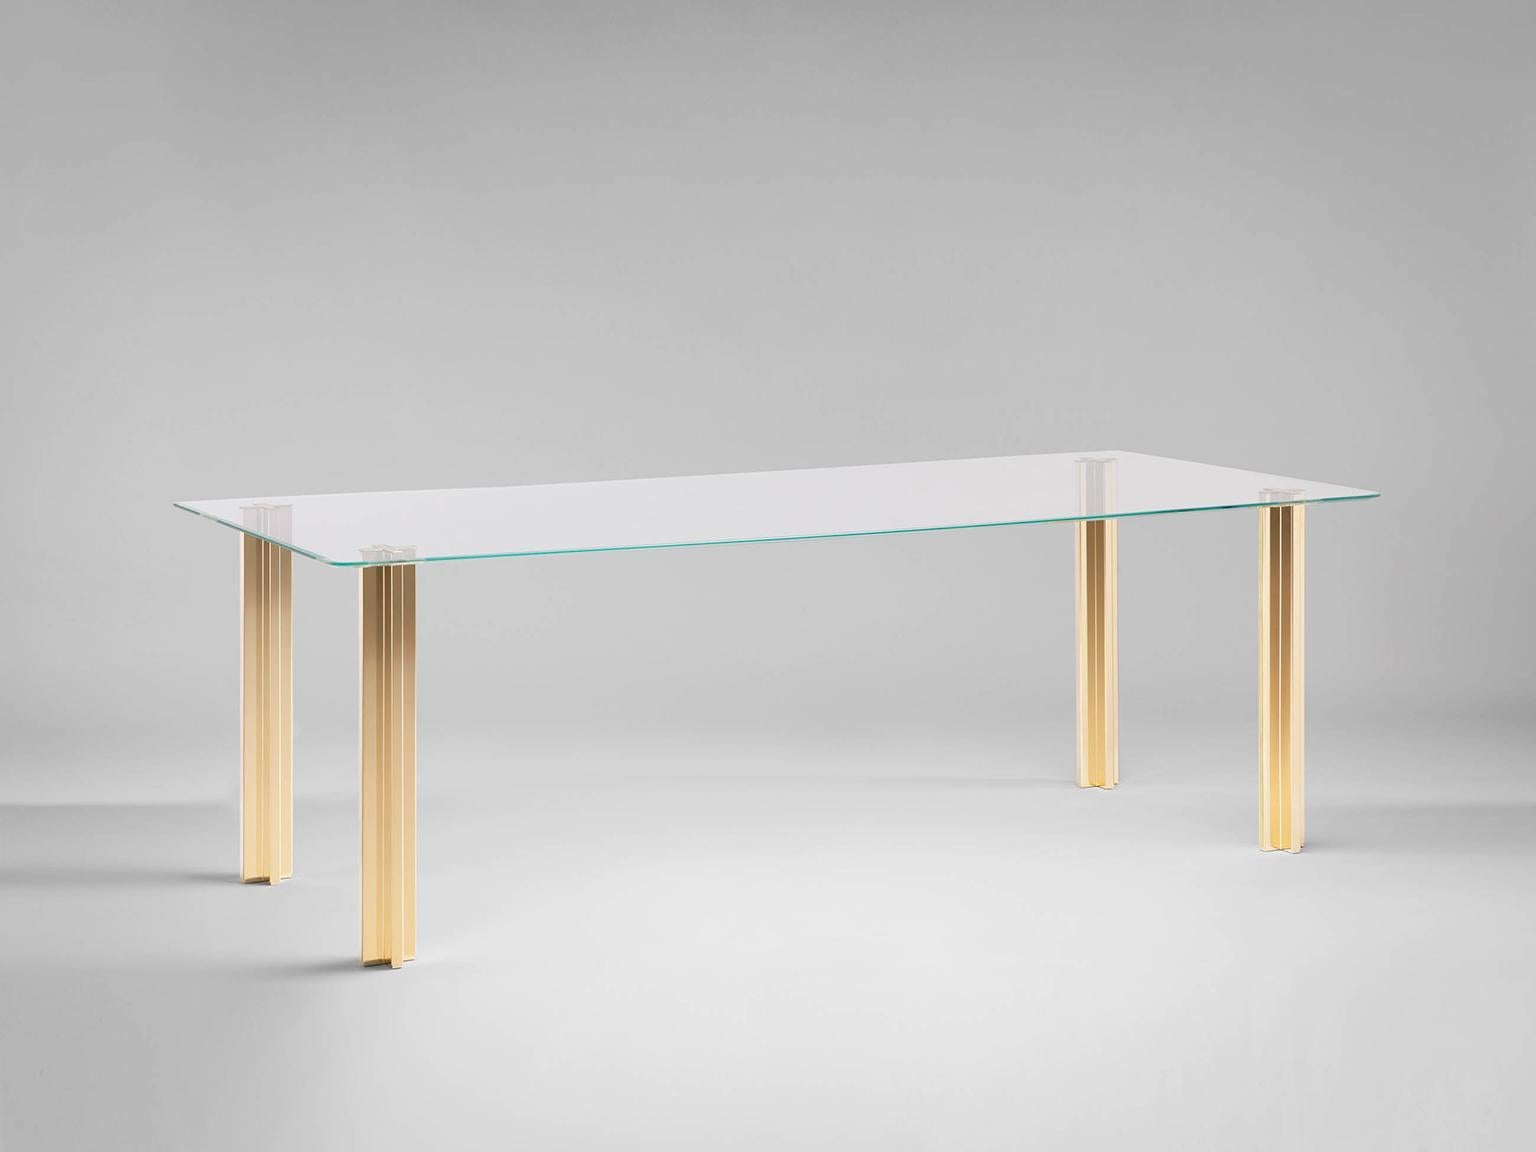 Sem gold collection, rectangular table with glass top: extra light transparent glass or smoke grey transparent glass (12 mm thick). Plated aluminium legs finished in 24-karat polished or fine brushed yellow gold. The Gold collection has a range of